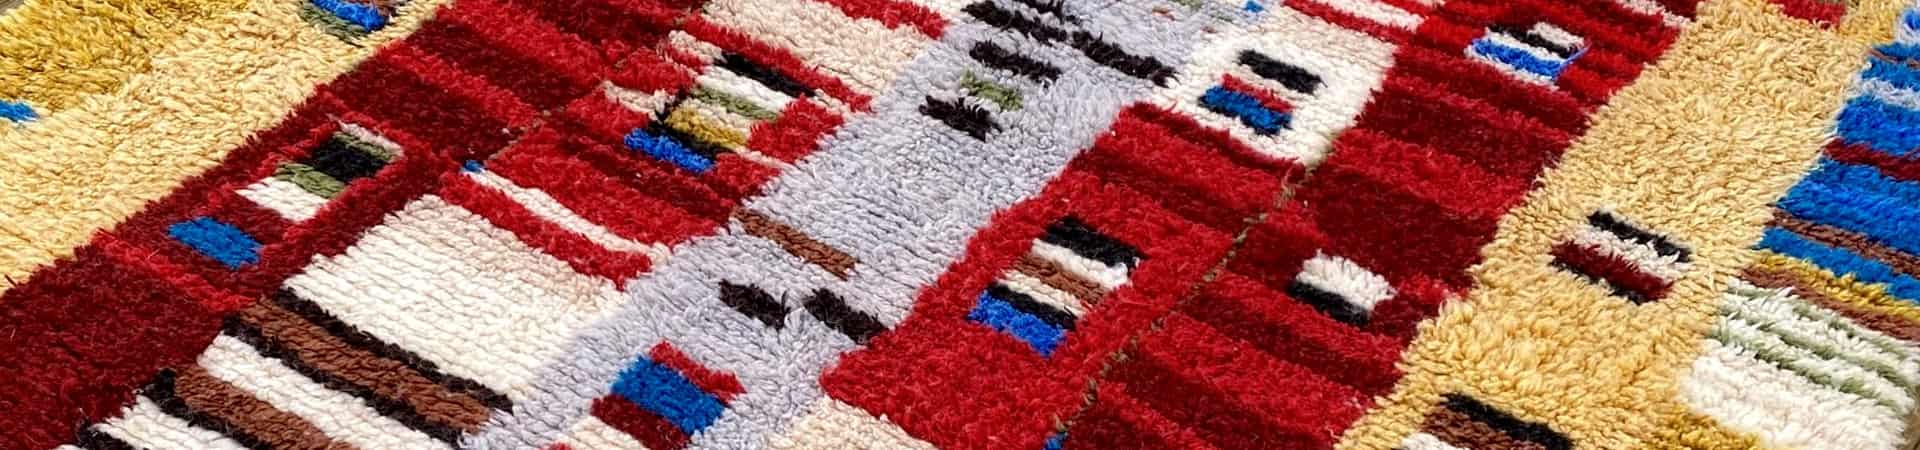 Modern rugs, designer rugs and contemporary rugs